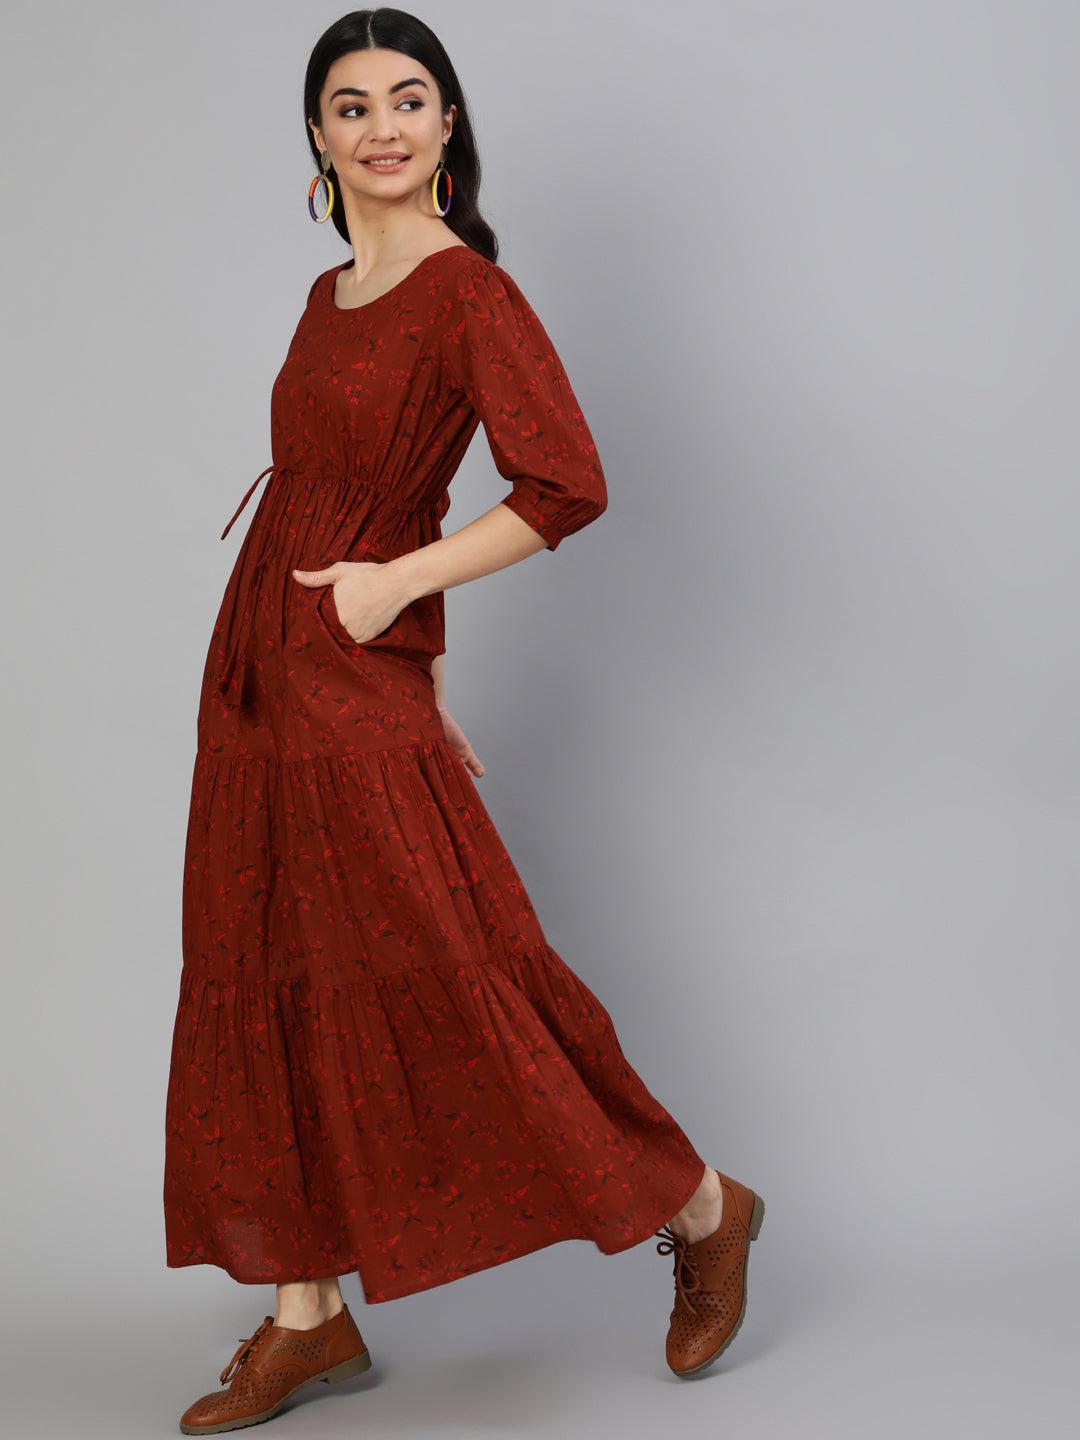 maroon-printed-tiered-dress-10804003MR, Women Clothing, Cotton Dress